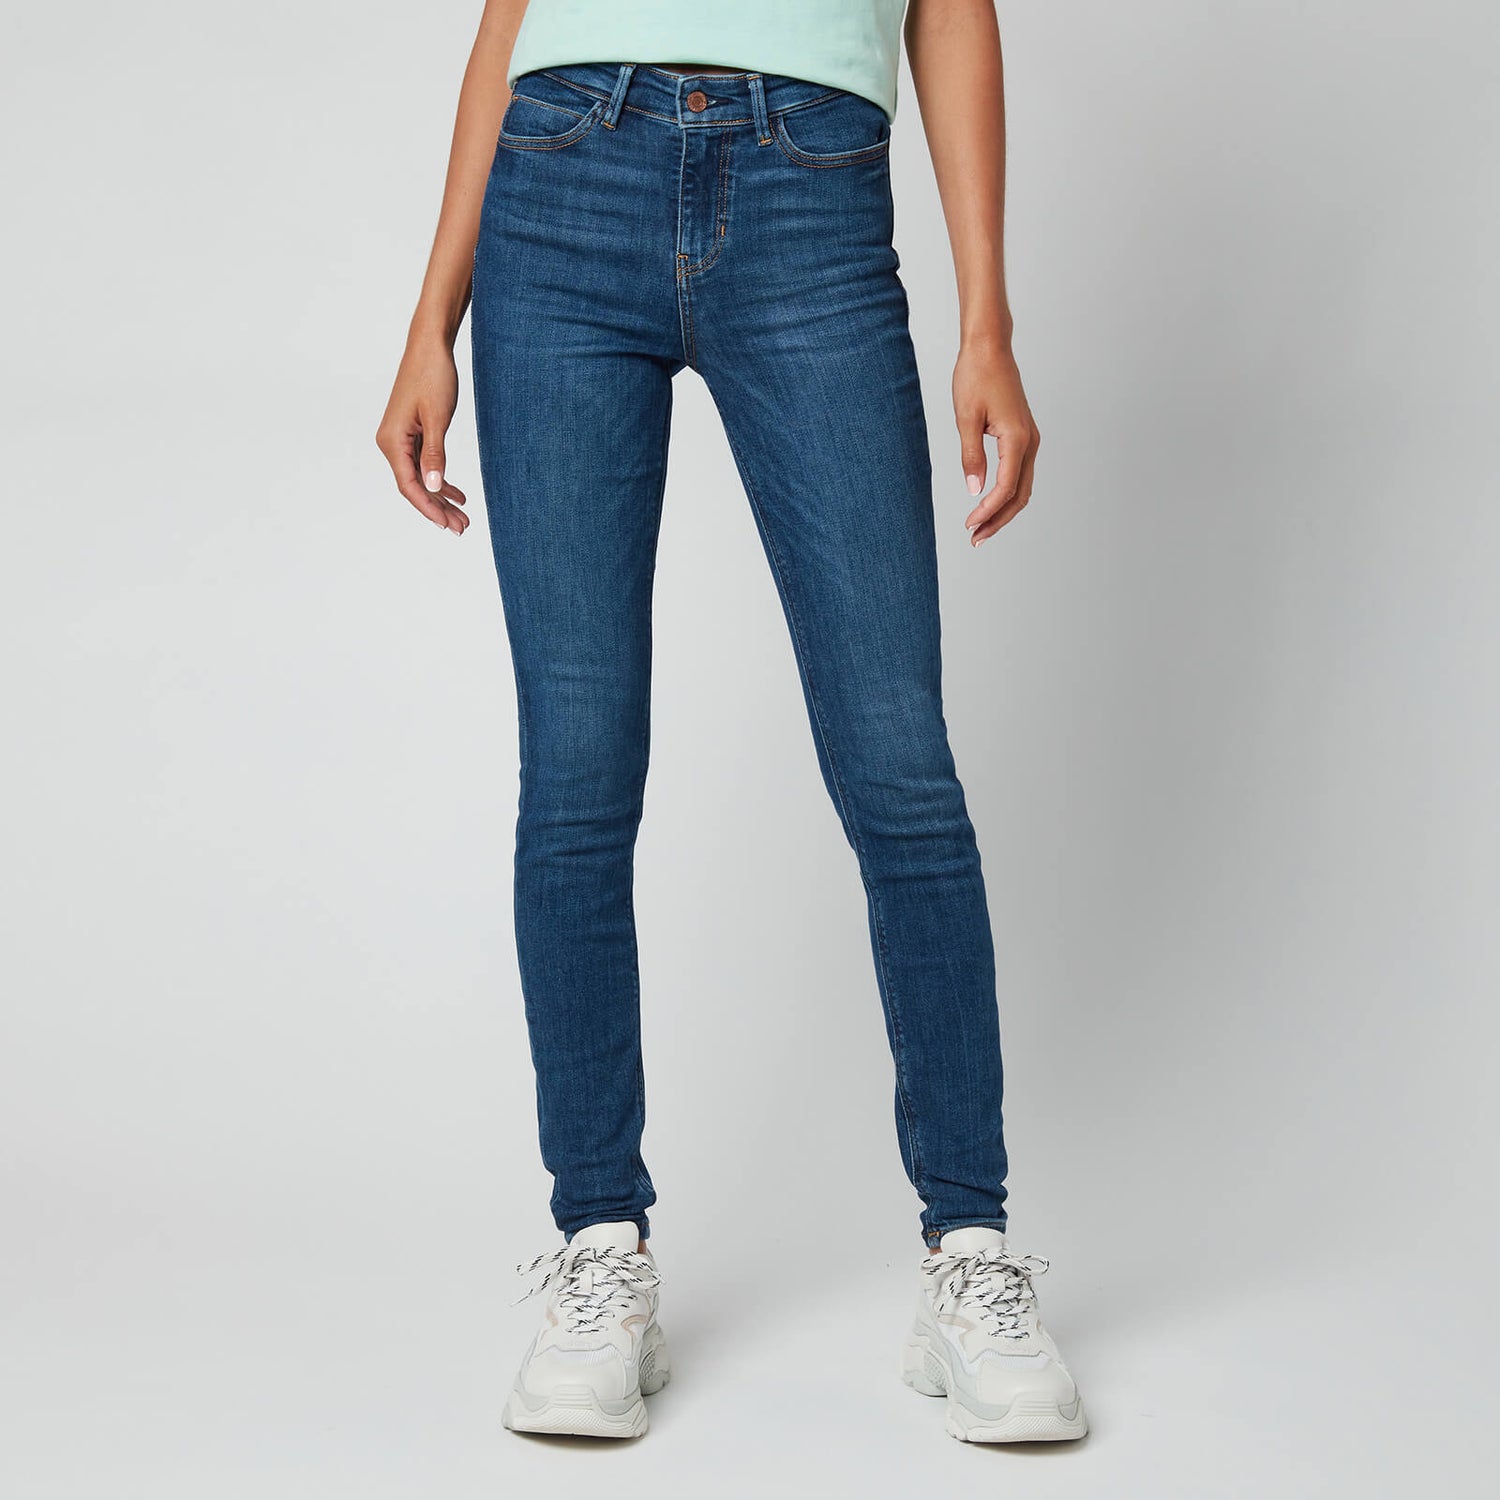 Guess Women's 1981 Skinny Jeans - Carrie Mid